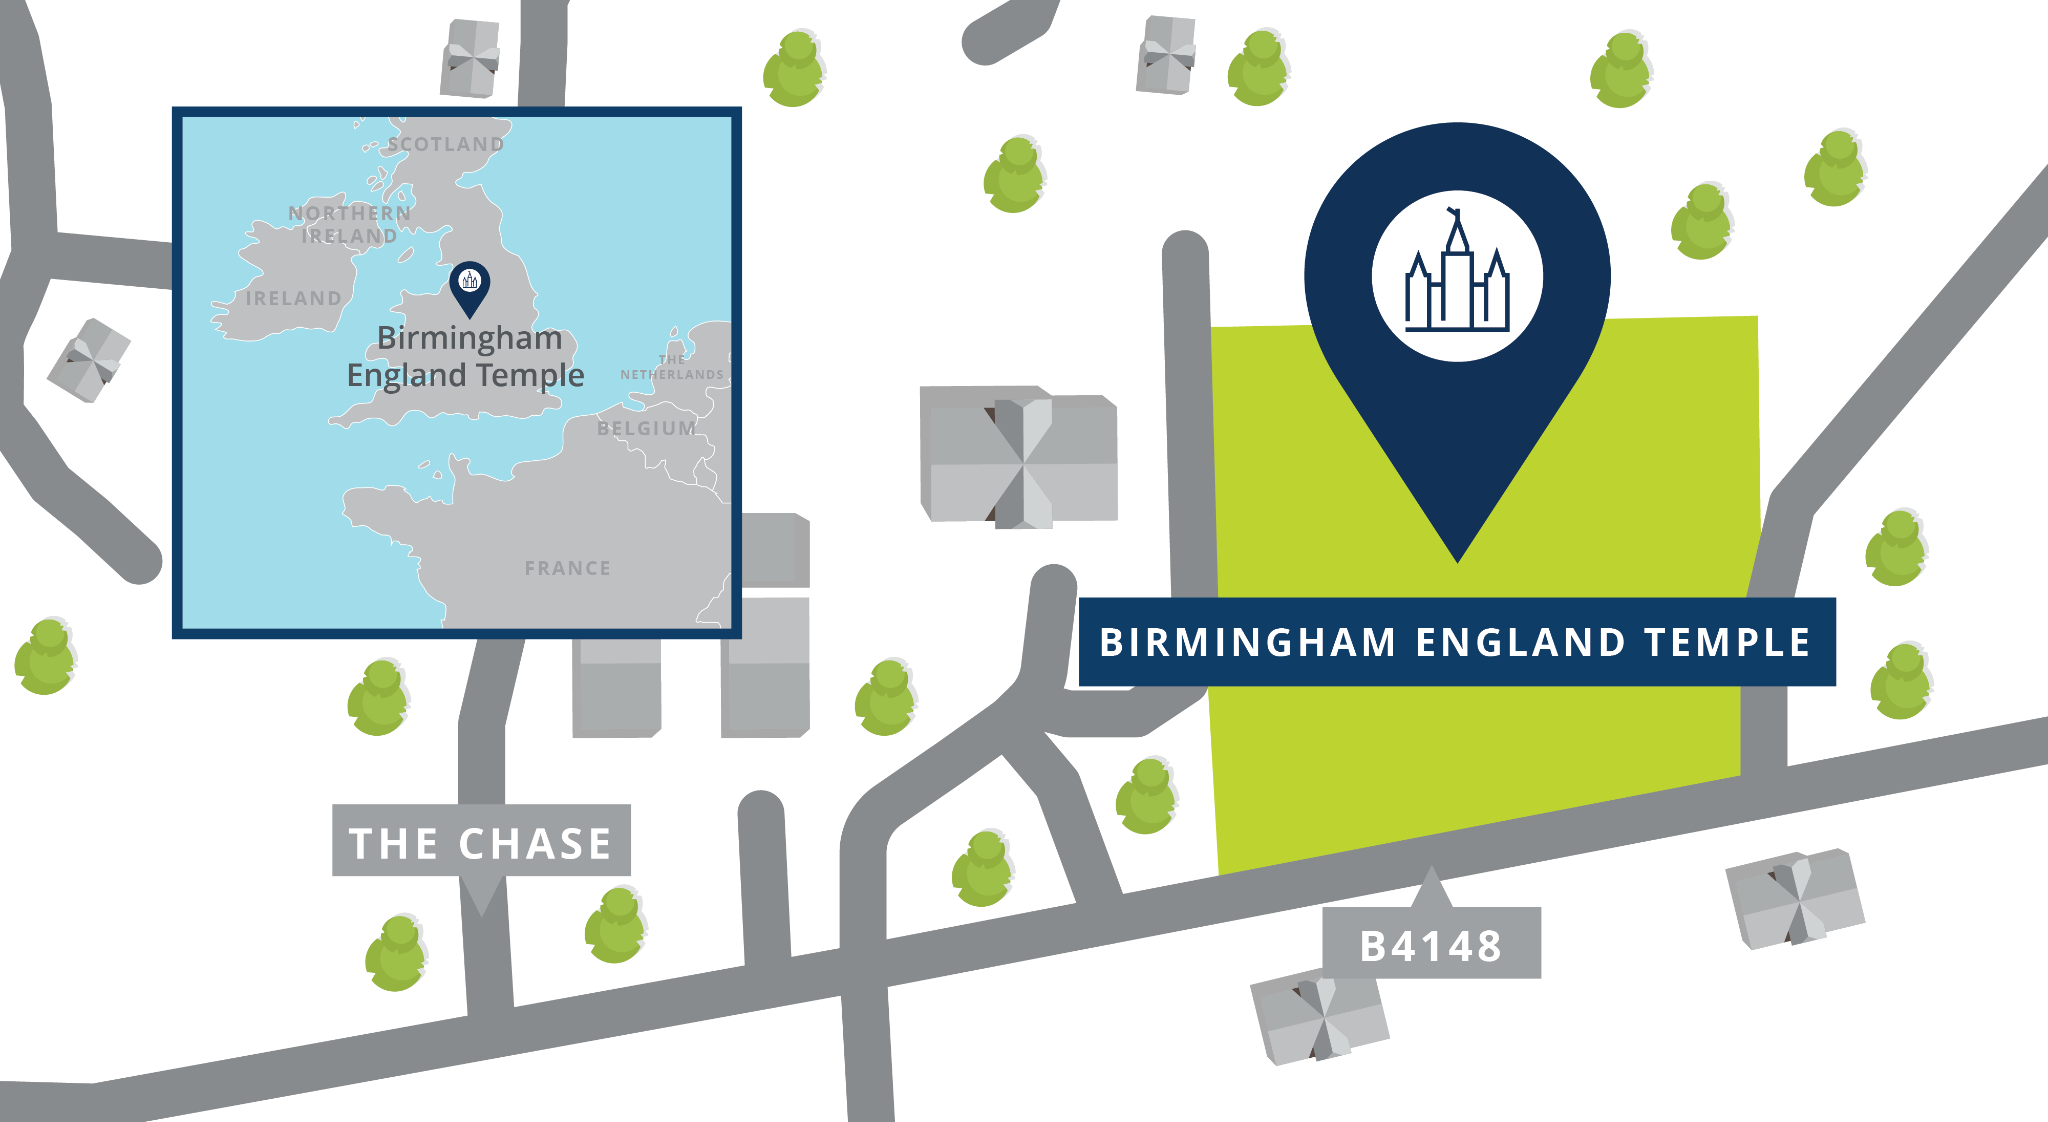 A map with a pin showing the location of the Birmingham England Temple site, with nearby roads.